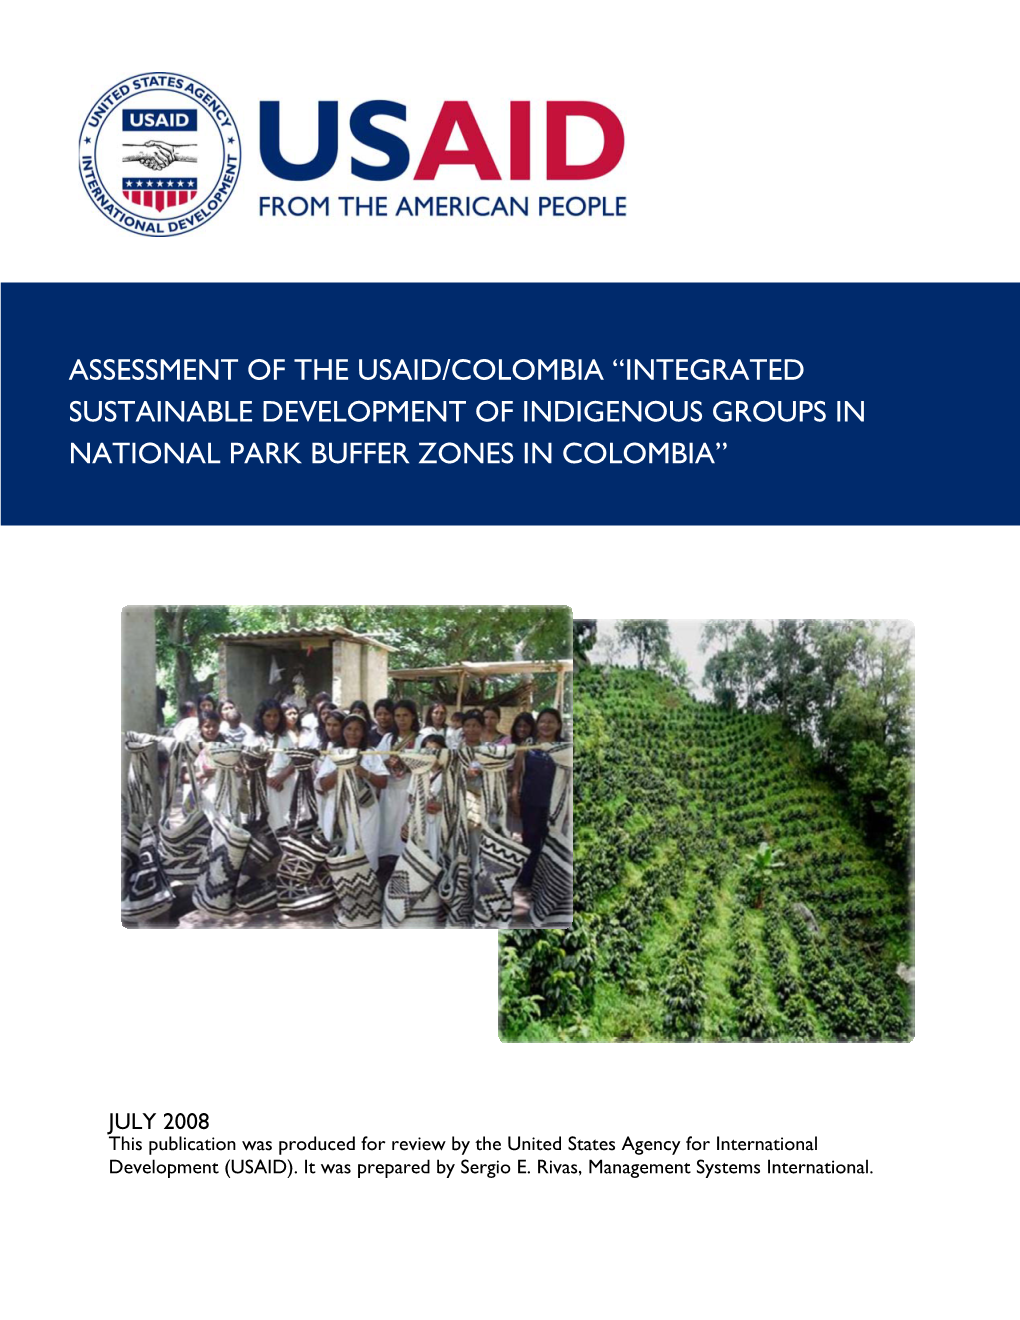 Assessment of the Usaid/Colombia “Integrated Sustainable Development of Indigenous Groups in National Park Buffer Zones in Colombia”